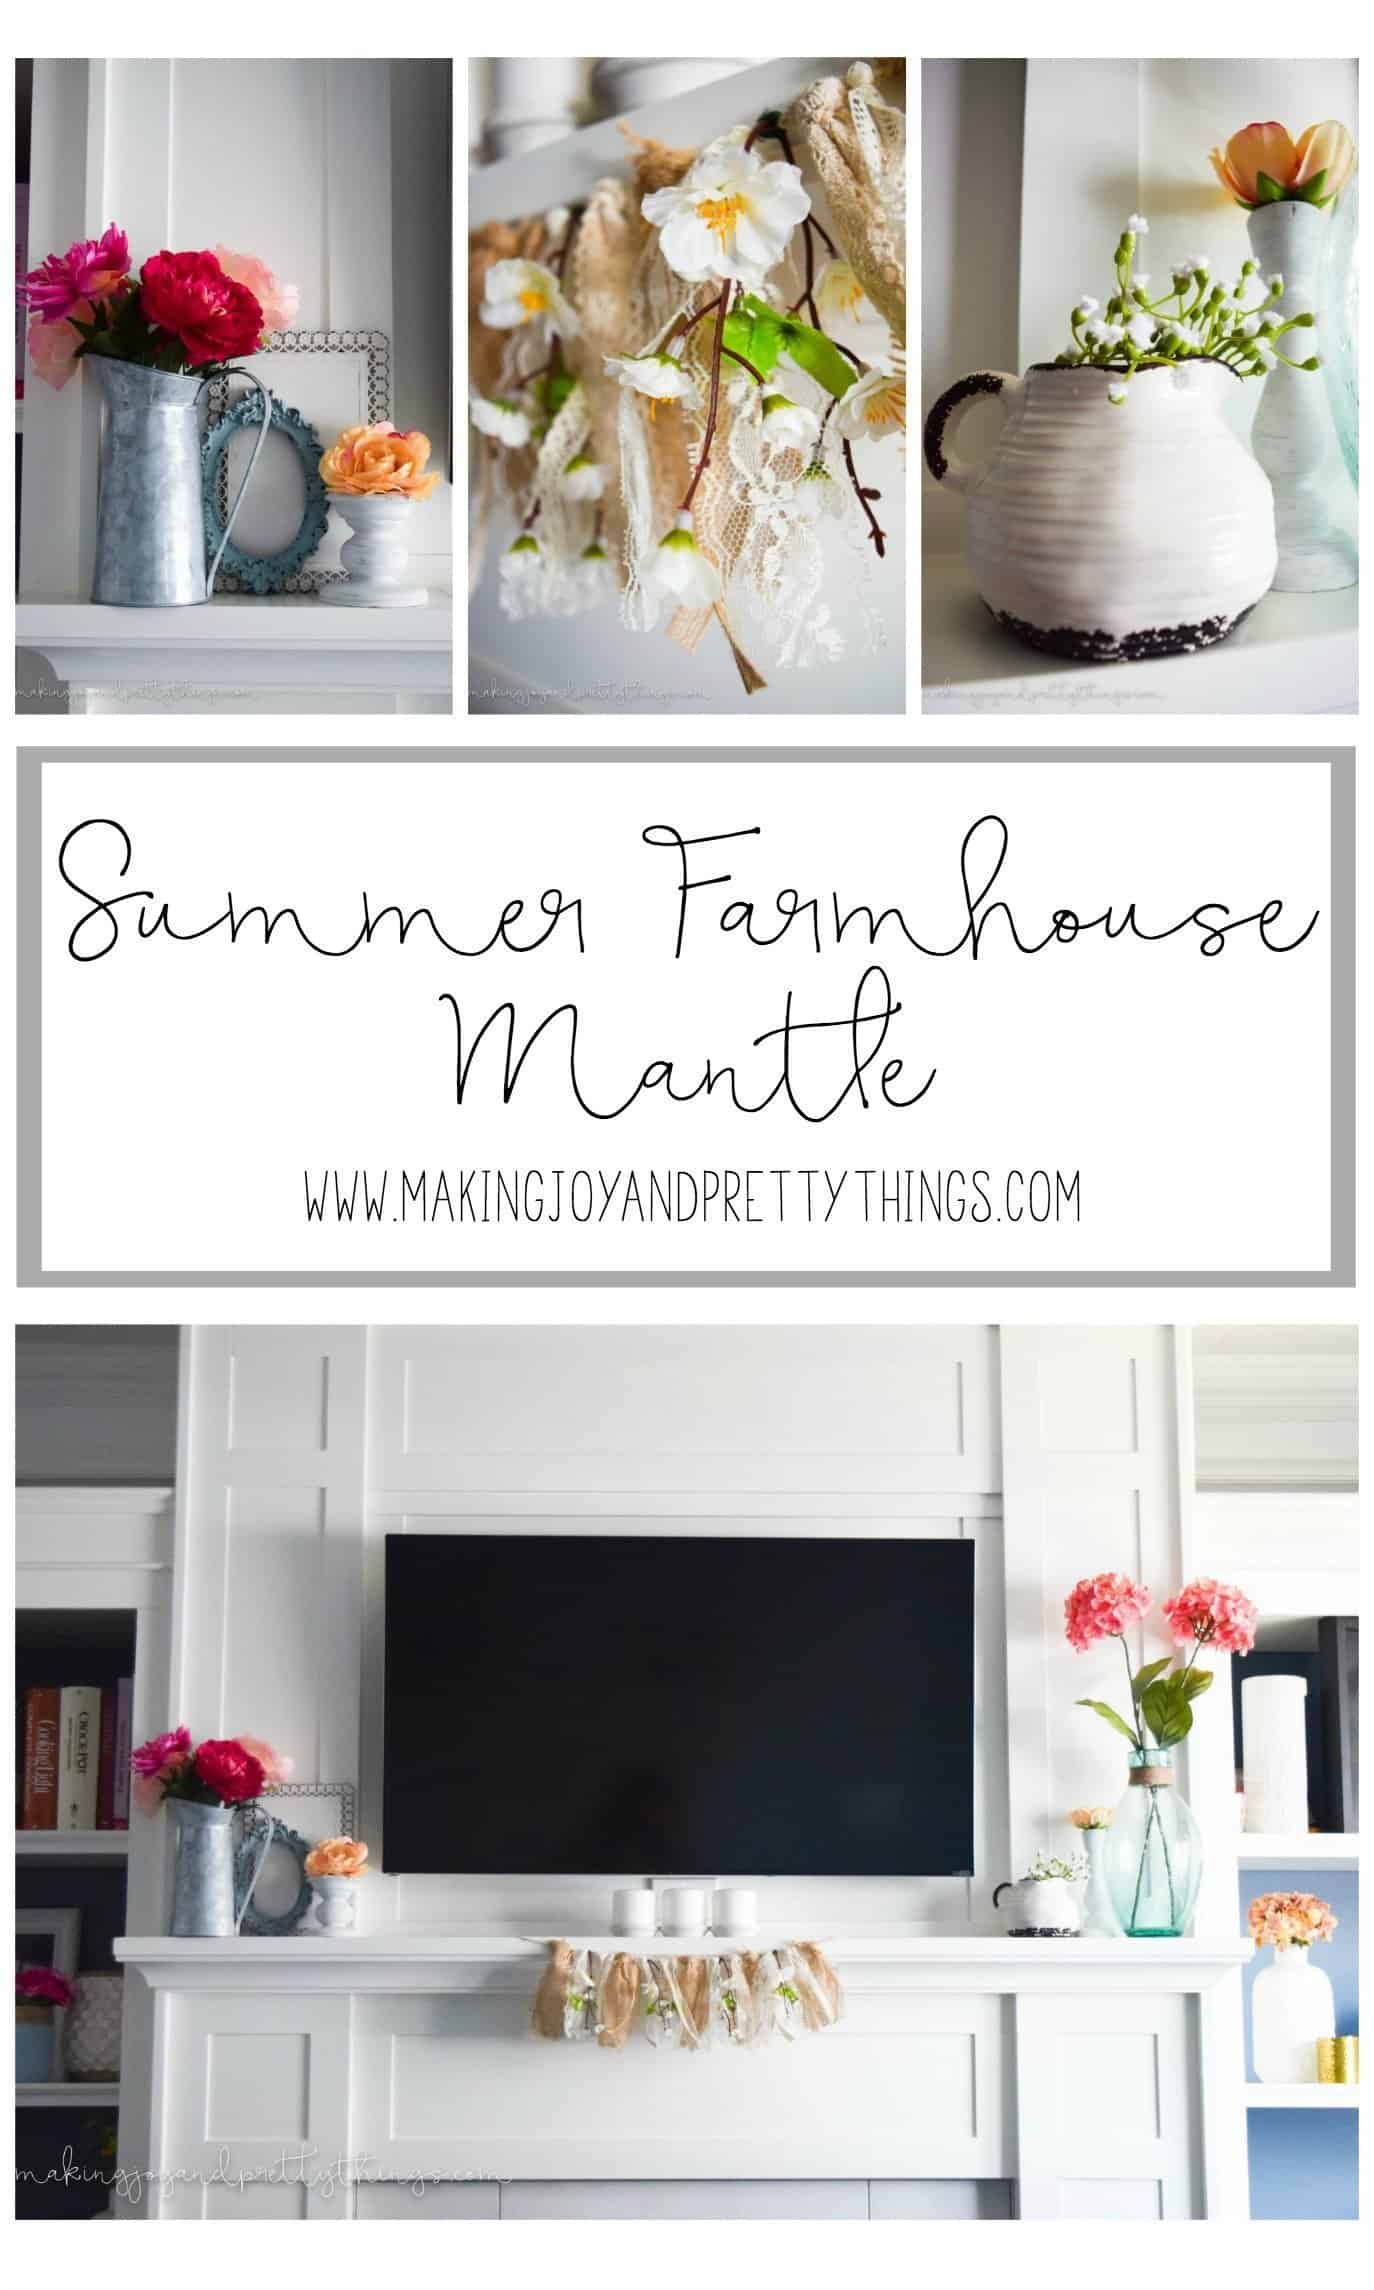 A collage of images show the different pieces of summer mantle decor - faux florals in vases, farmhouse pottery, and a rustic floral banner. In the center, image text reads 